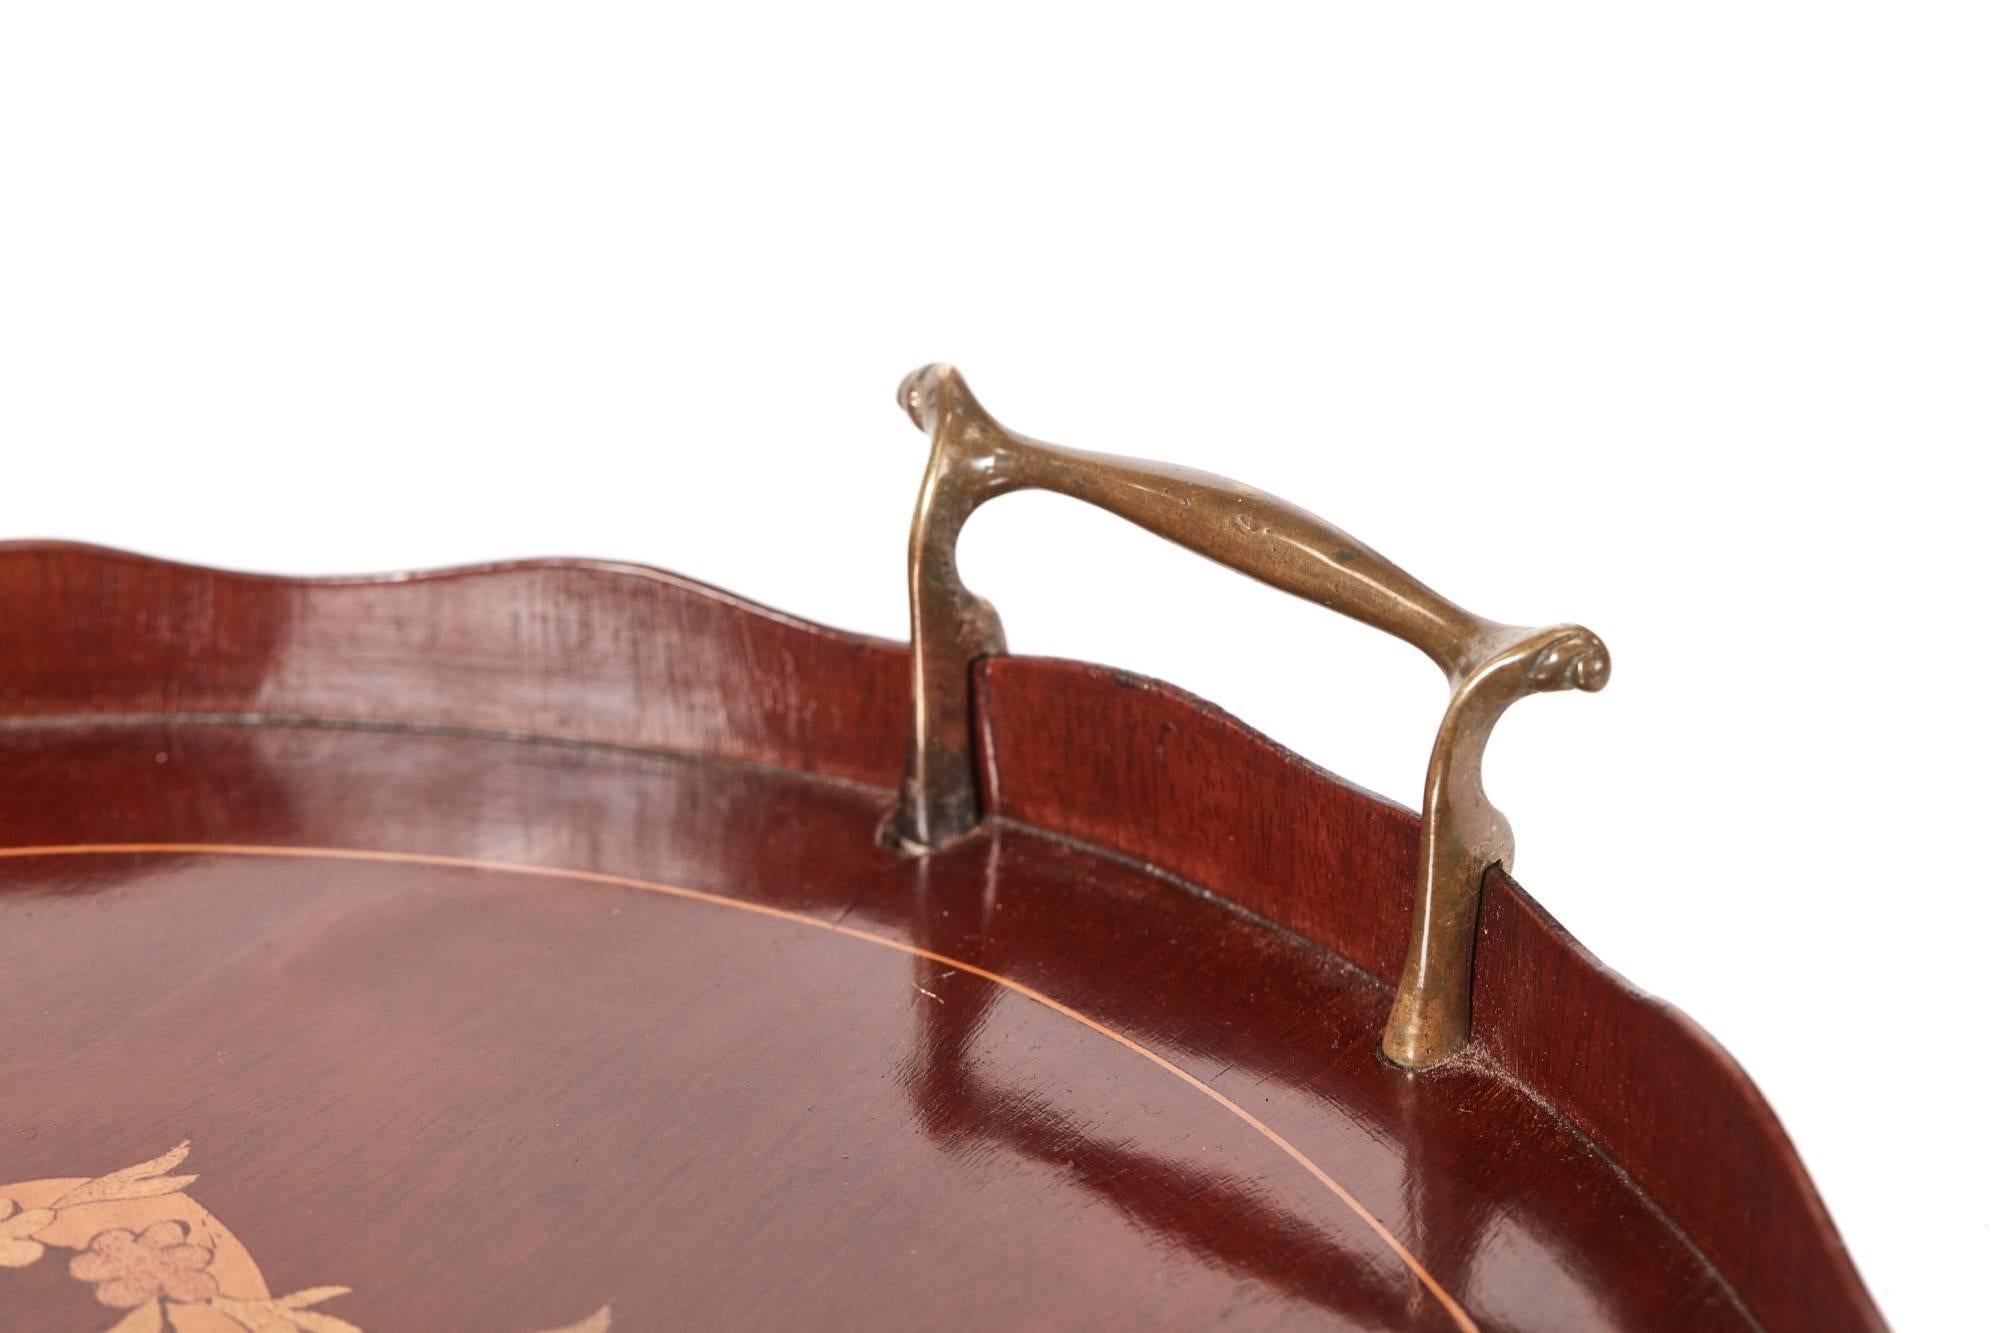 Outstanding quality Edwardian inlaid mahogany oval tray, original brass handles, fantastic inlaid centre with garlands around a large shell
Fantastic color and condition
Measure: 27